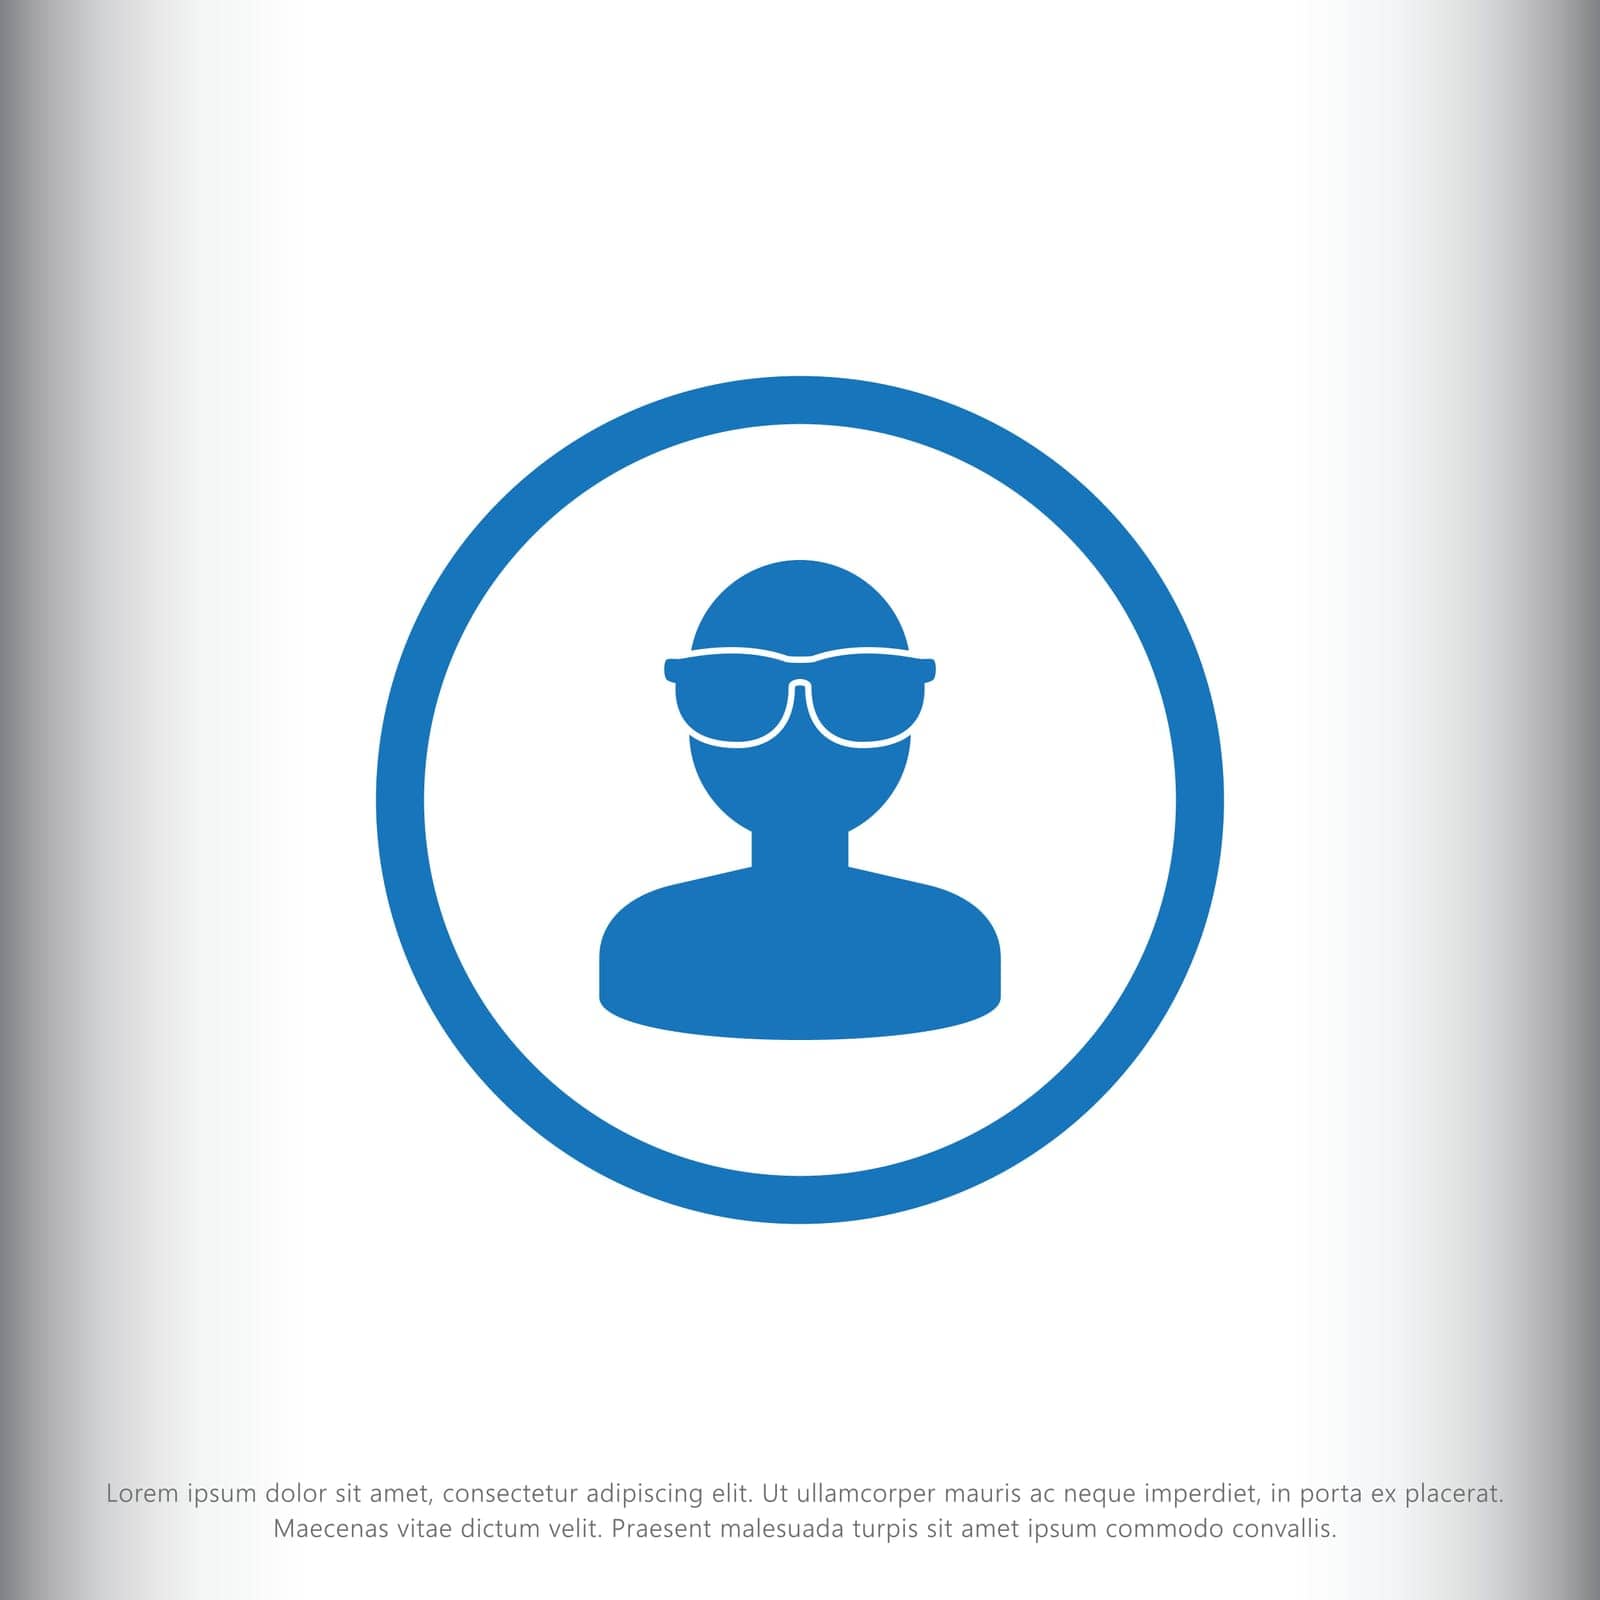 play,symbol,game,virtual,entertainment,line,icon,sign,isolated,video,augmented,pictograph,head,glasses,computer,outline,view,cyberspace,flat,design,helmet,electronic,logo,vector,man,mask,glass,pretty,gaming,headset,eyewear,profile,technology,cyber,background,reality,wireless,illustration,vr,device,internet by ogqcorp